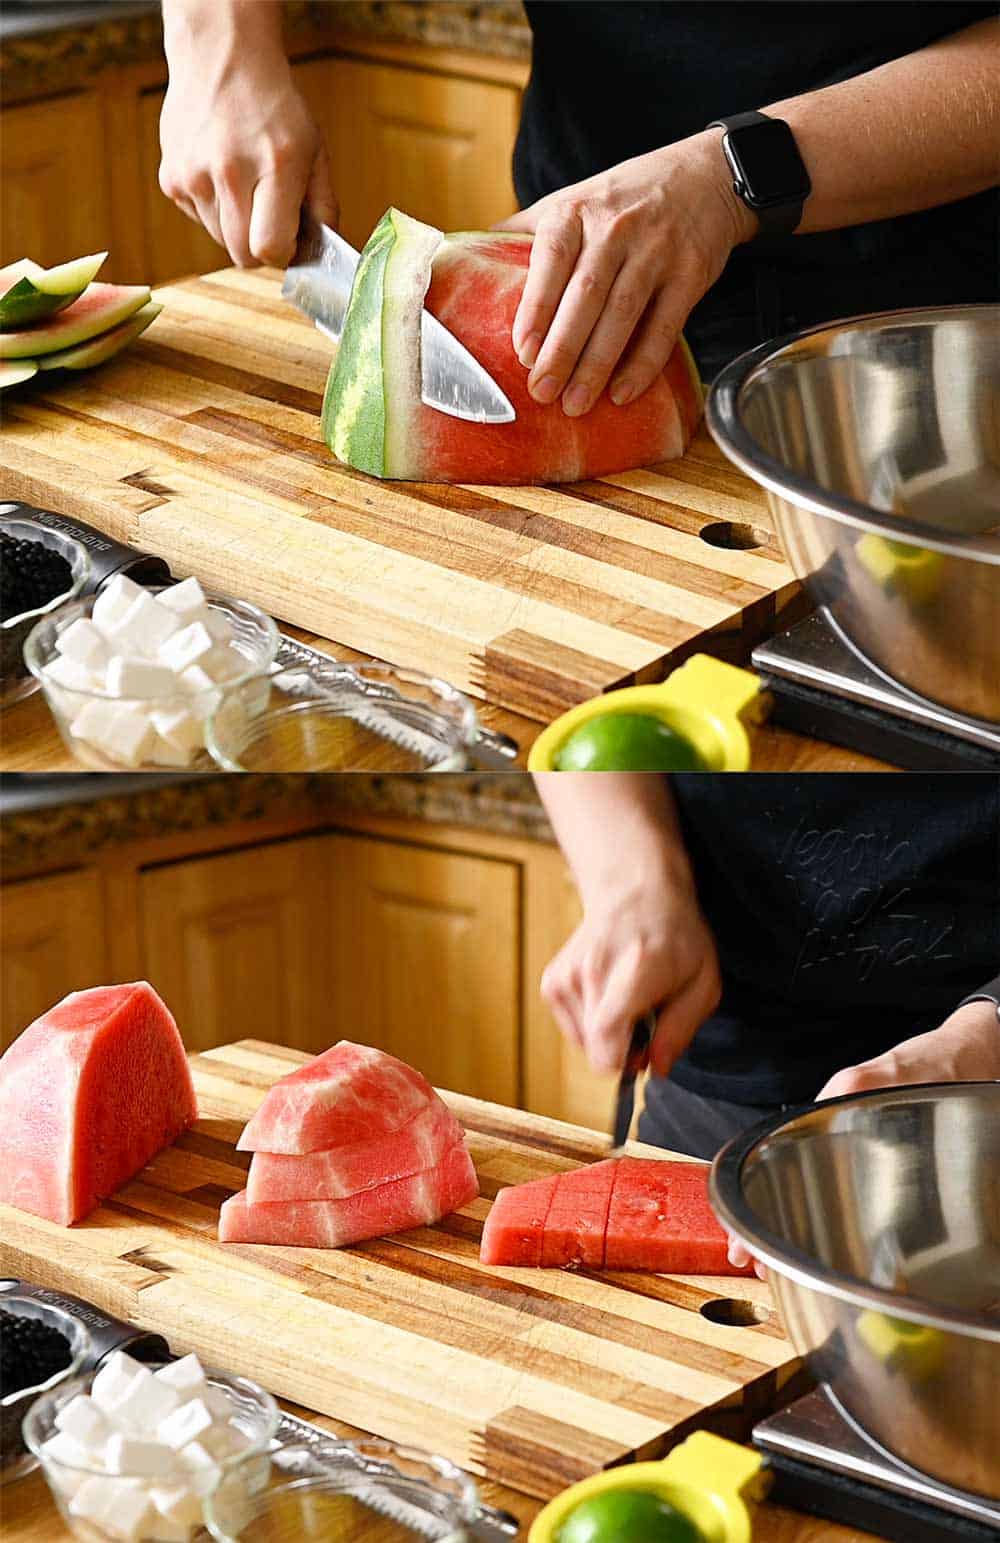 Image collage of prepping watermelon and cubing it for salad